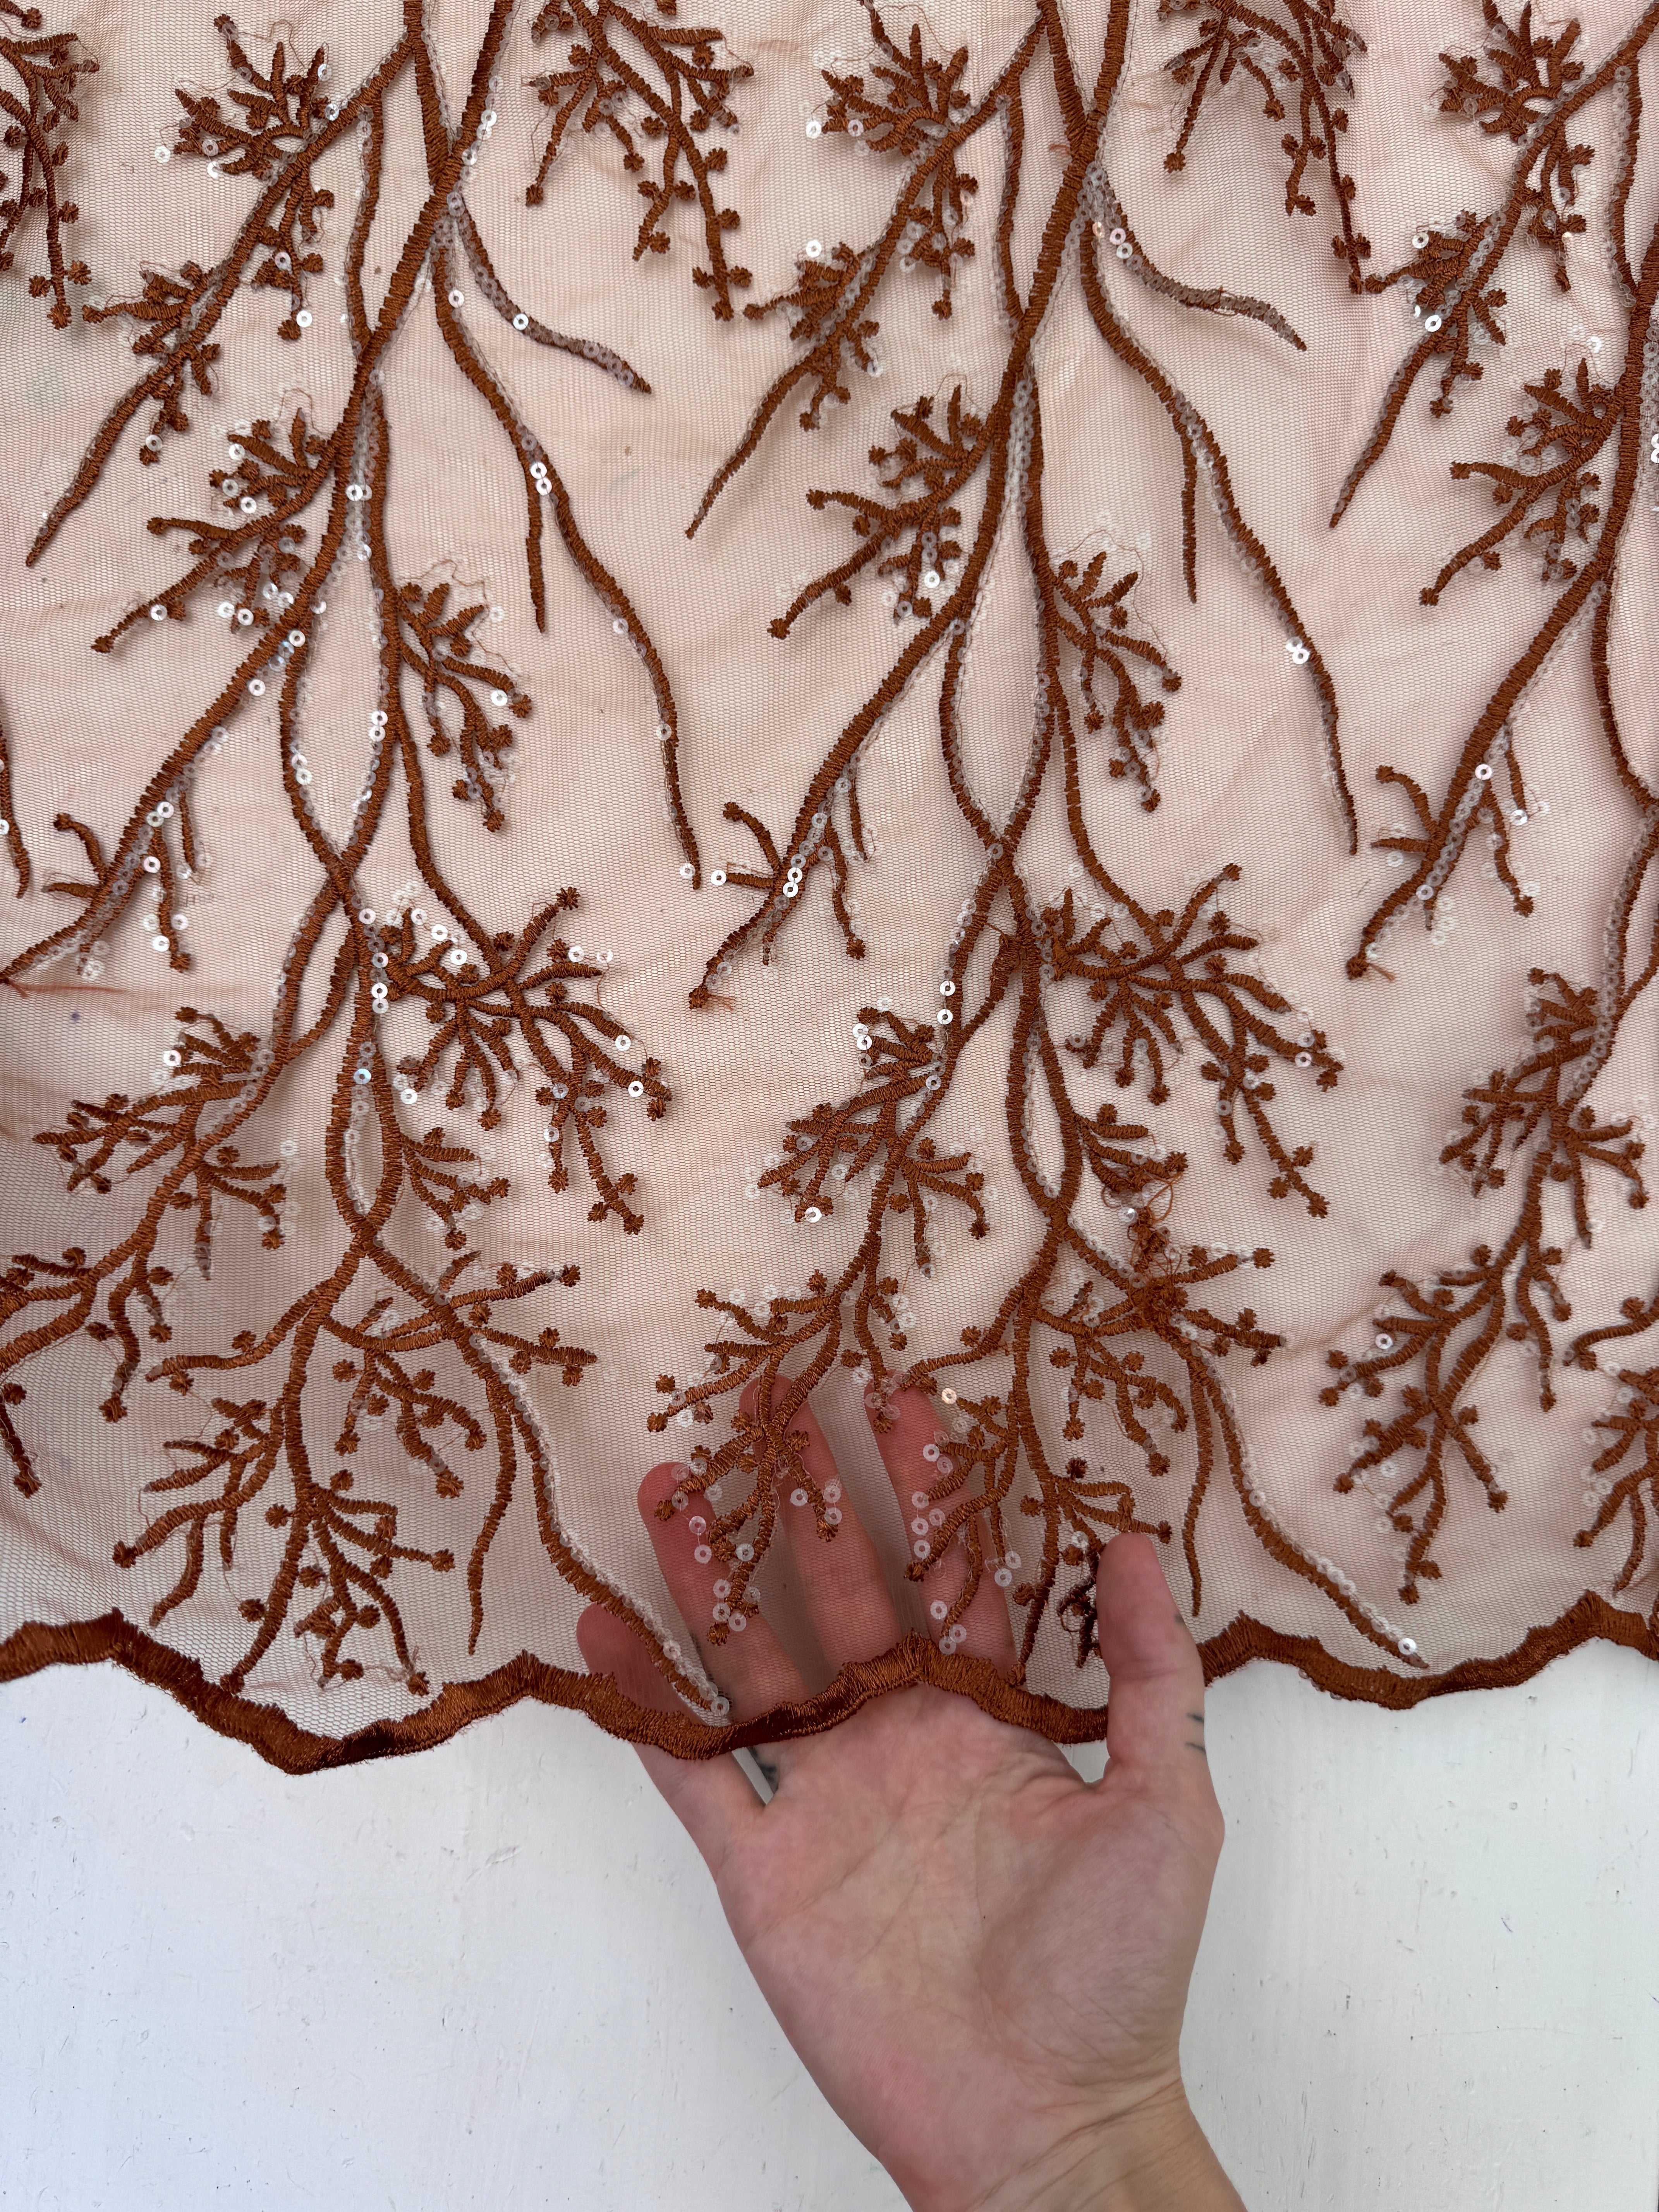 Caramel Embroidered Scalloped Branch Lace, brown Embroidered Scalloped Branch Lace, light brown Embroidered Scalloped Branch Lace, dark brown Embroidered Scalloped Branch Lace, Embroidered Scalloped Branch Lace for woman, Embroidered Scalloped Branch Lace for bride, Embroidered Scalloped Branch Lace on discount